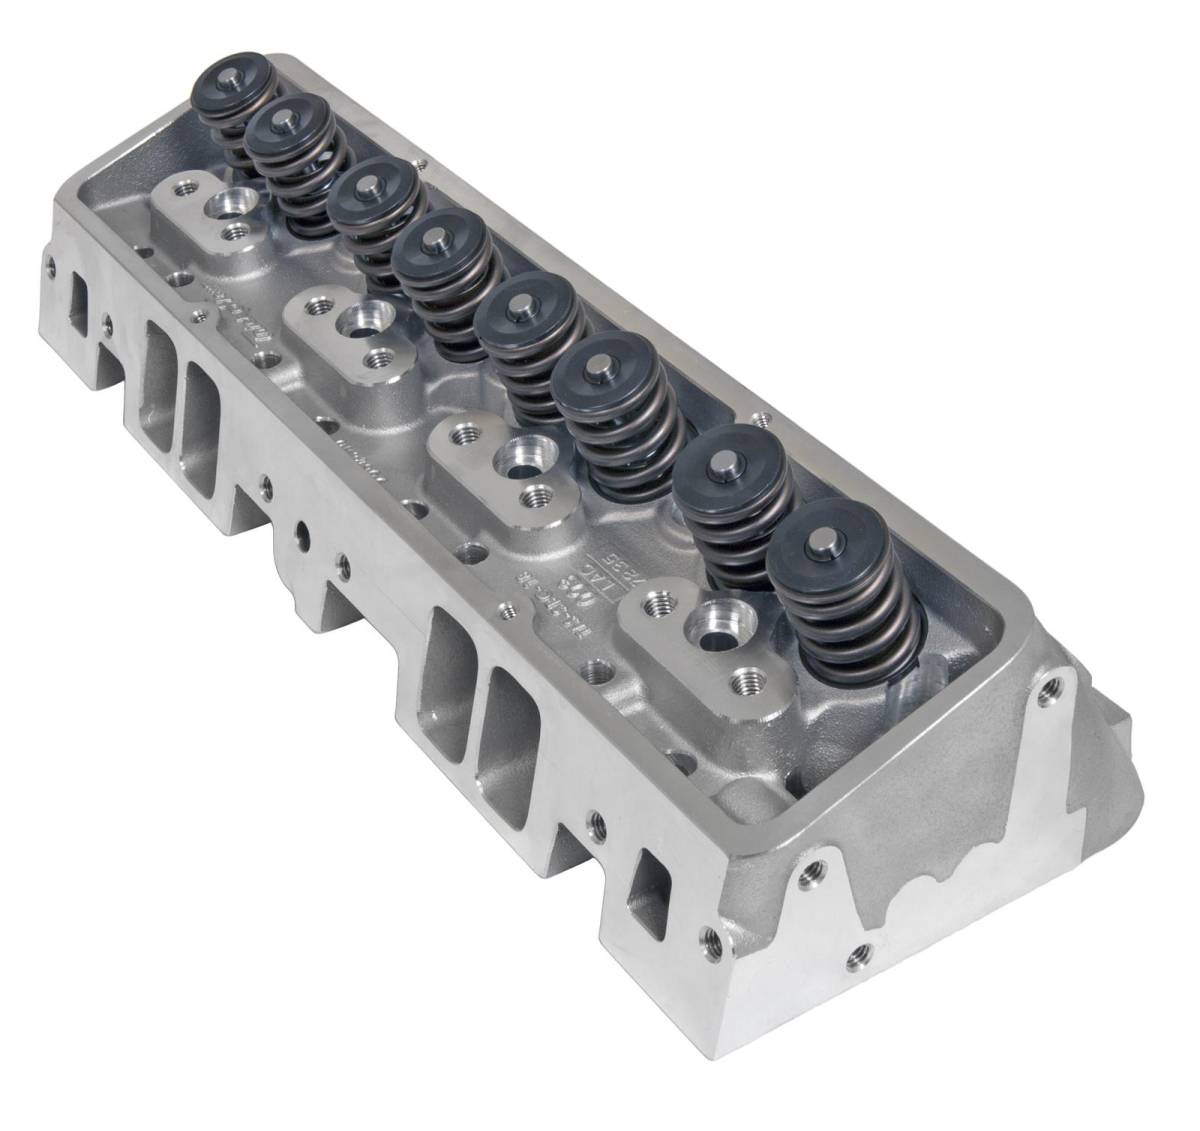 Trickflow - Trick Flow DHC SBC 175cc Aluminum Cylinder Heads for Small Block Chevrolet - With Accessory Bolt Holes - Image 1